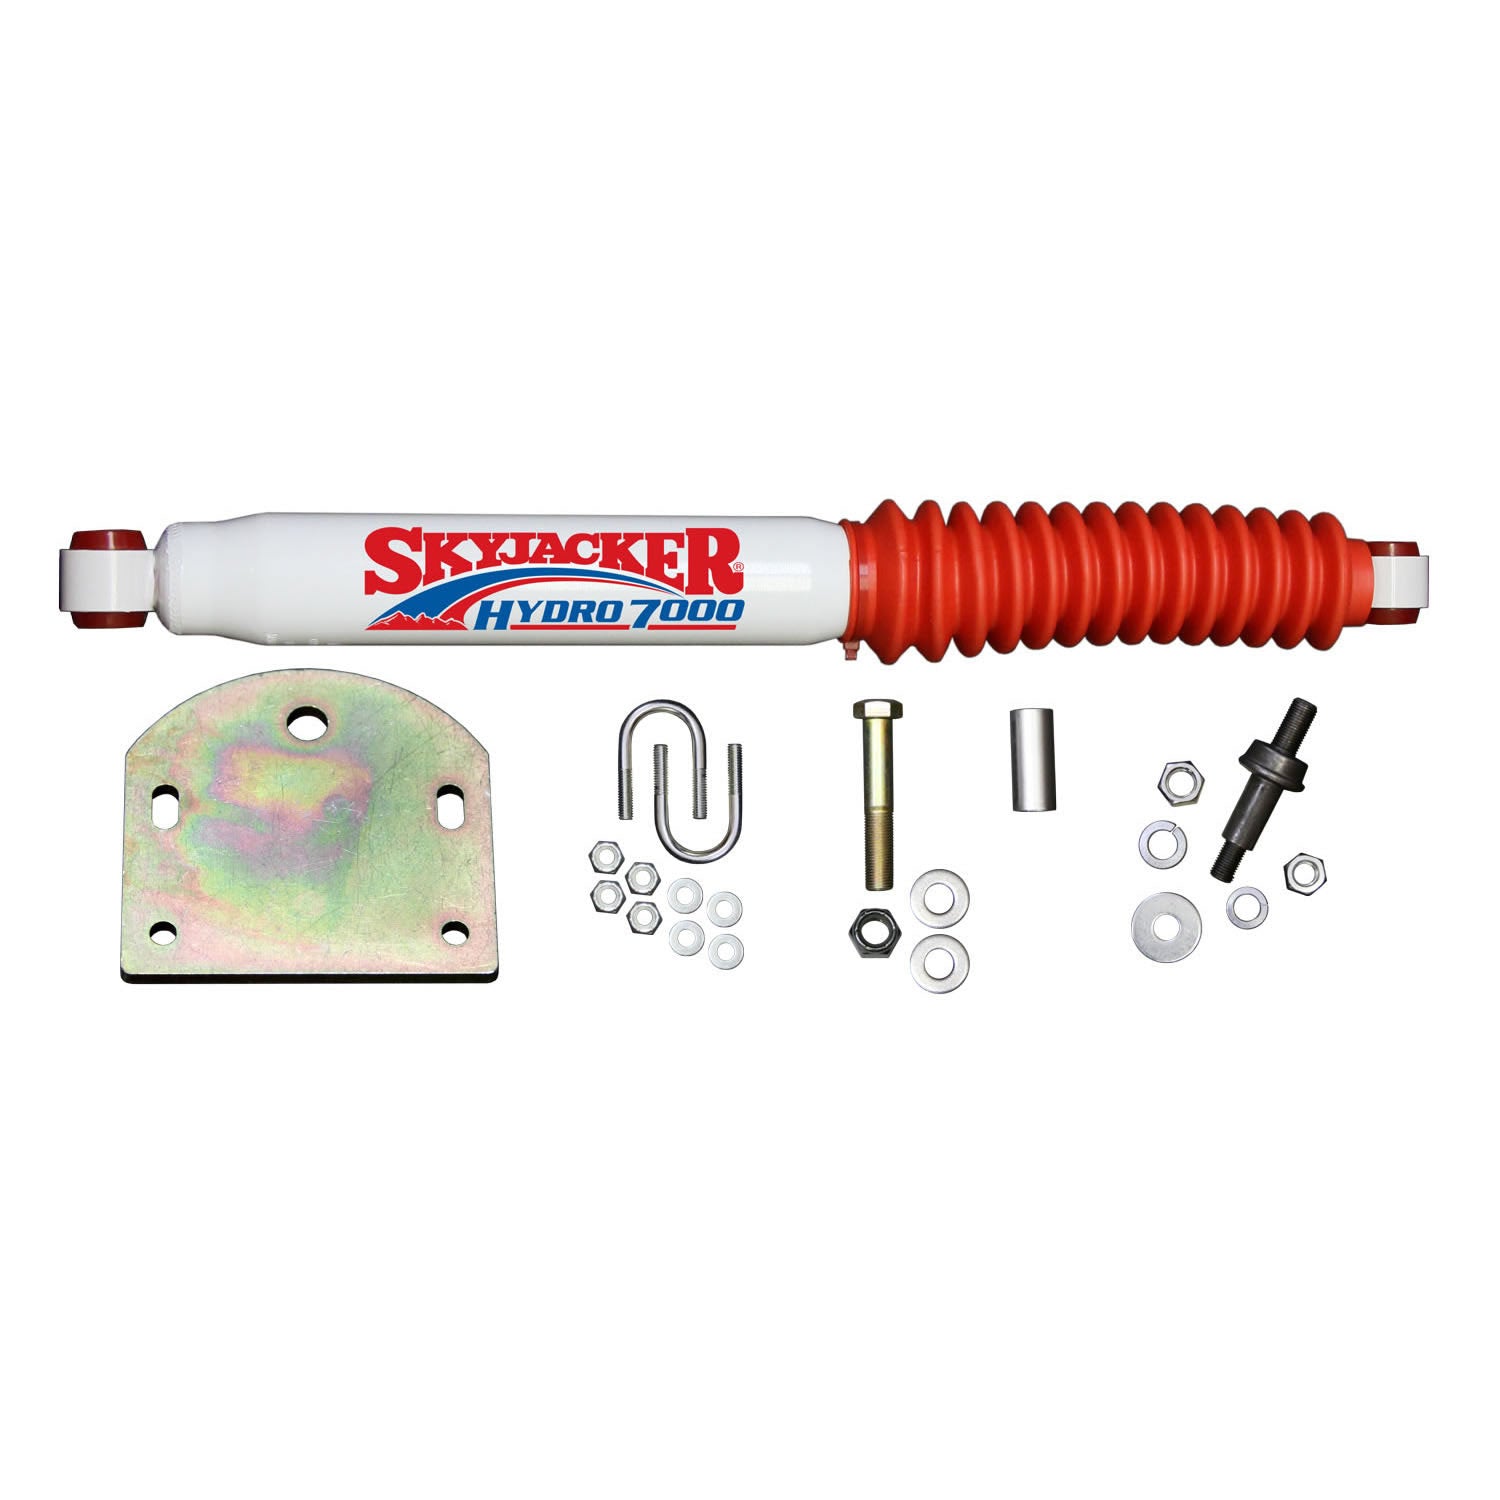 Steering Stabilizer Single Kit 99 Ford F-250 99-04 Ford F-250 Super Duty 99-04 Ford F-350 Super Duty 00-05 Ford Excursion Skyjacker